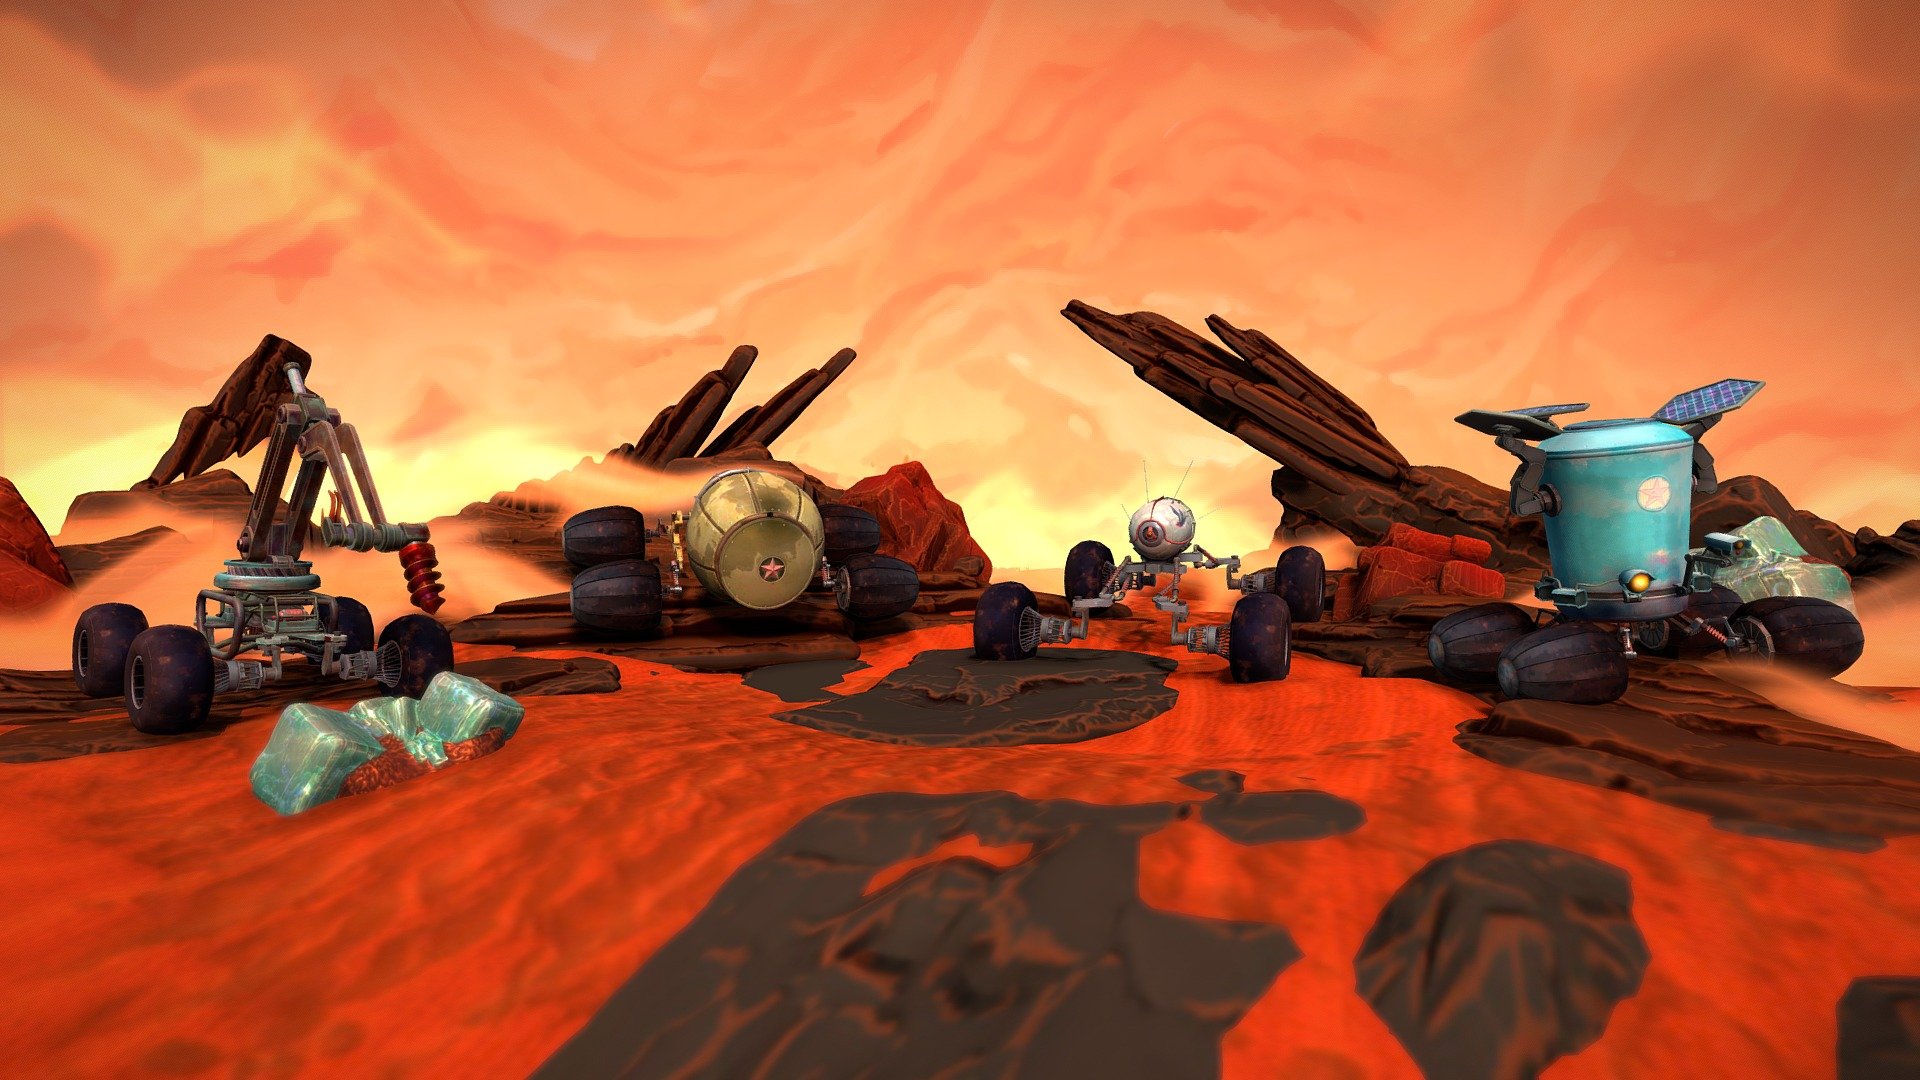 Here is a small Mars rovers scene.
All assets were created for the game &ldquo;Red Planet Pioneers